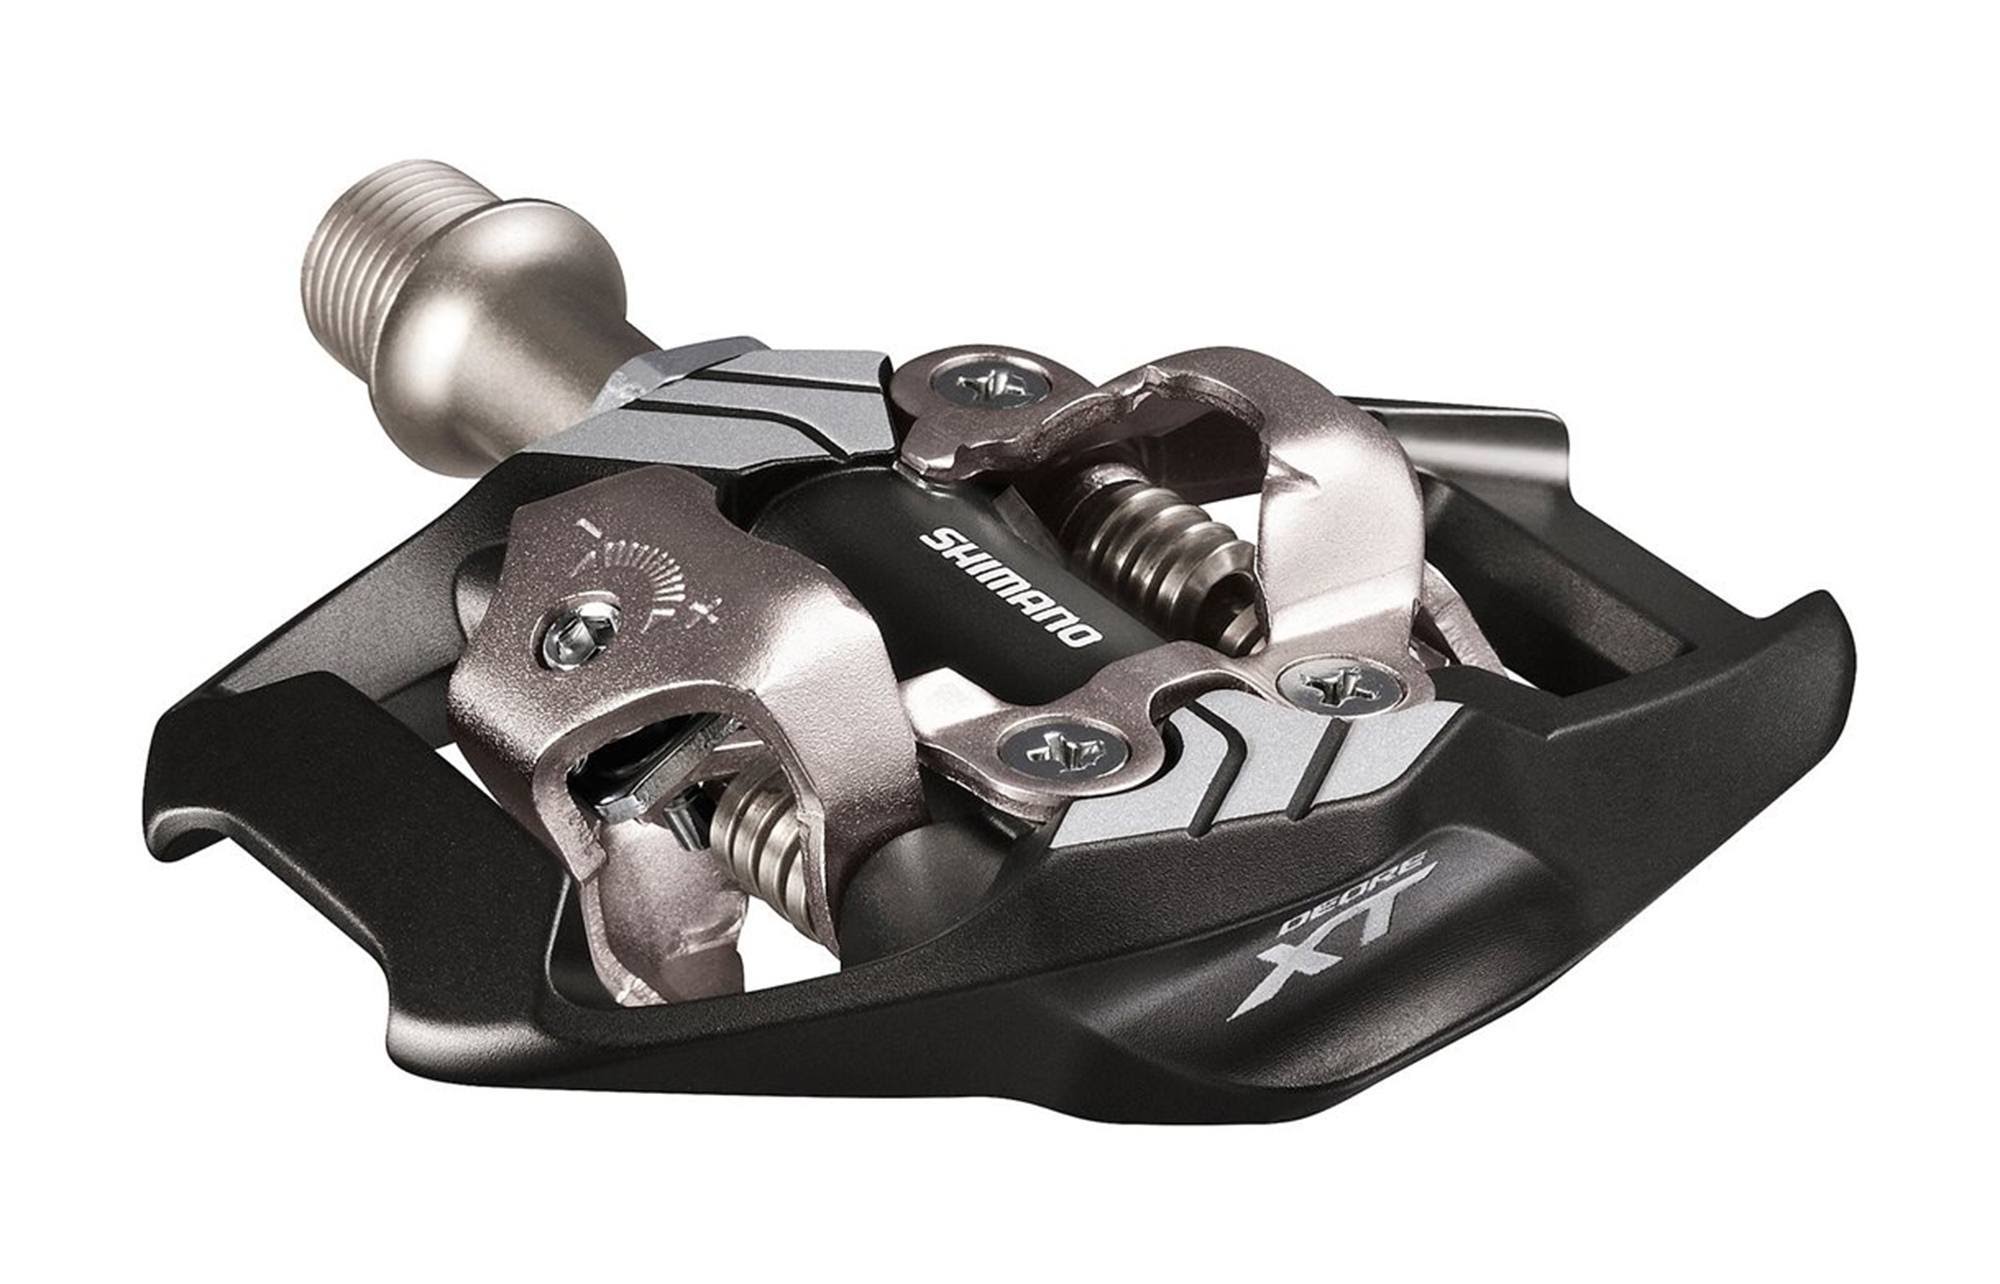 Shimano Deore Trail Pedals - Black